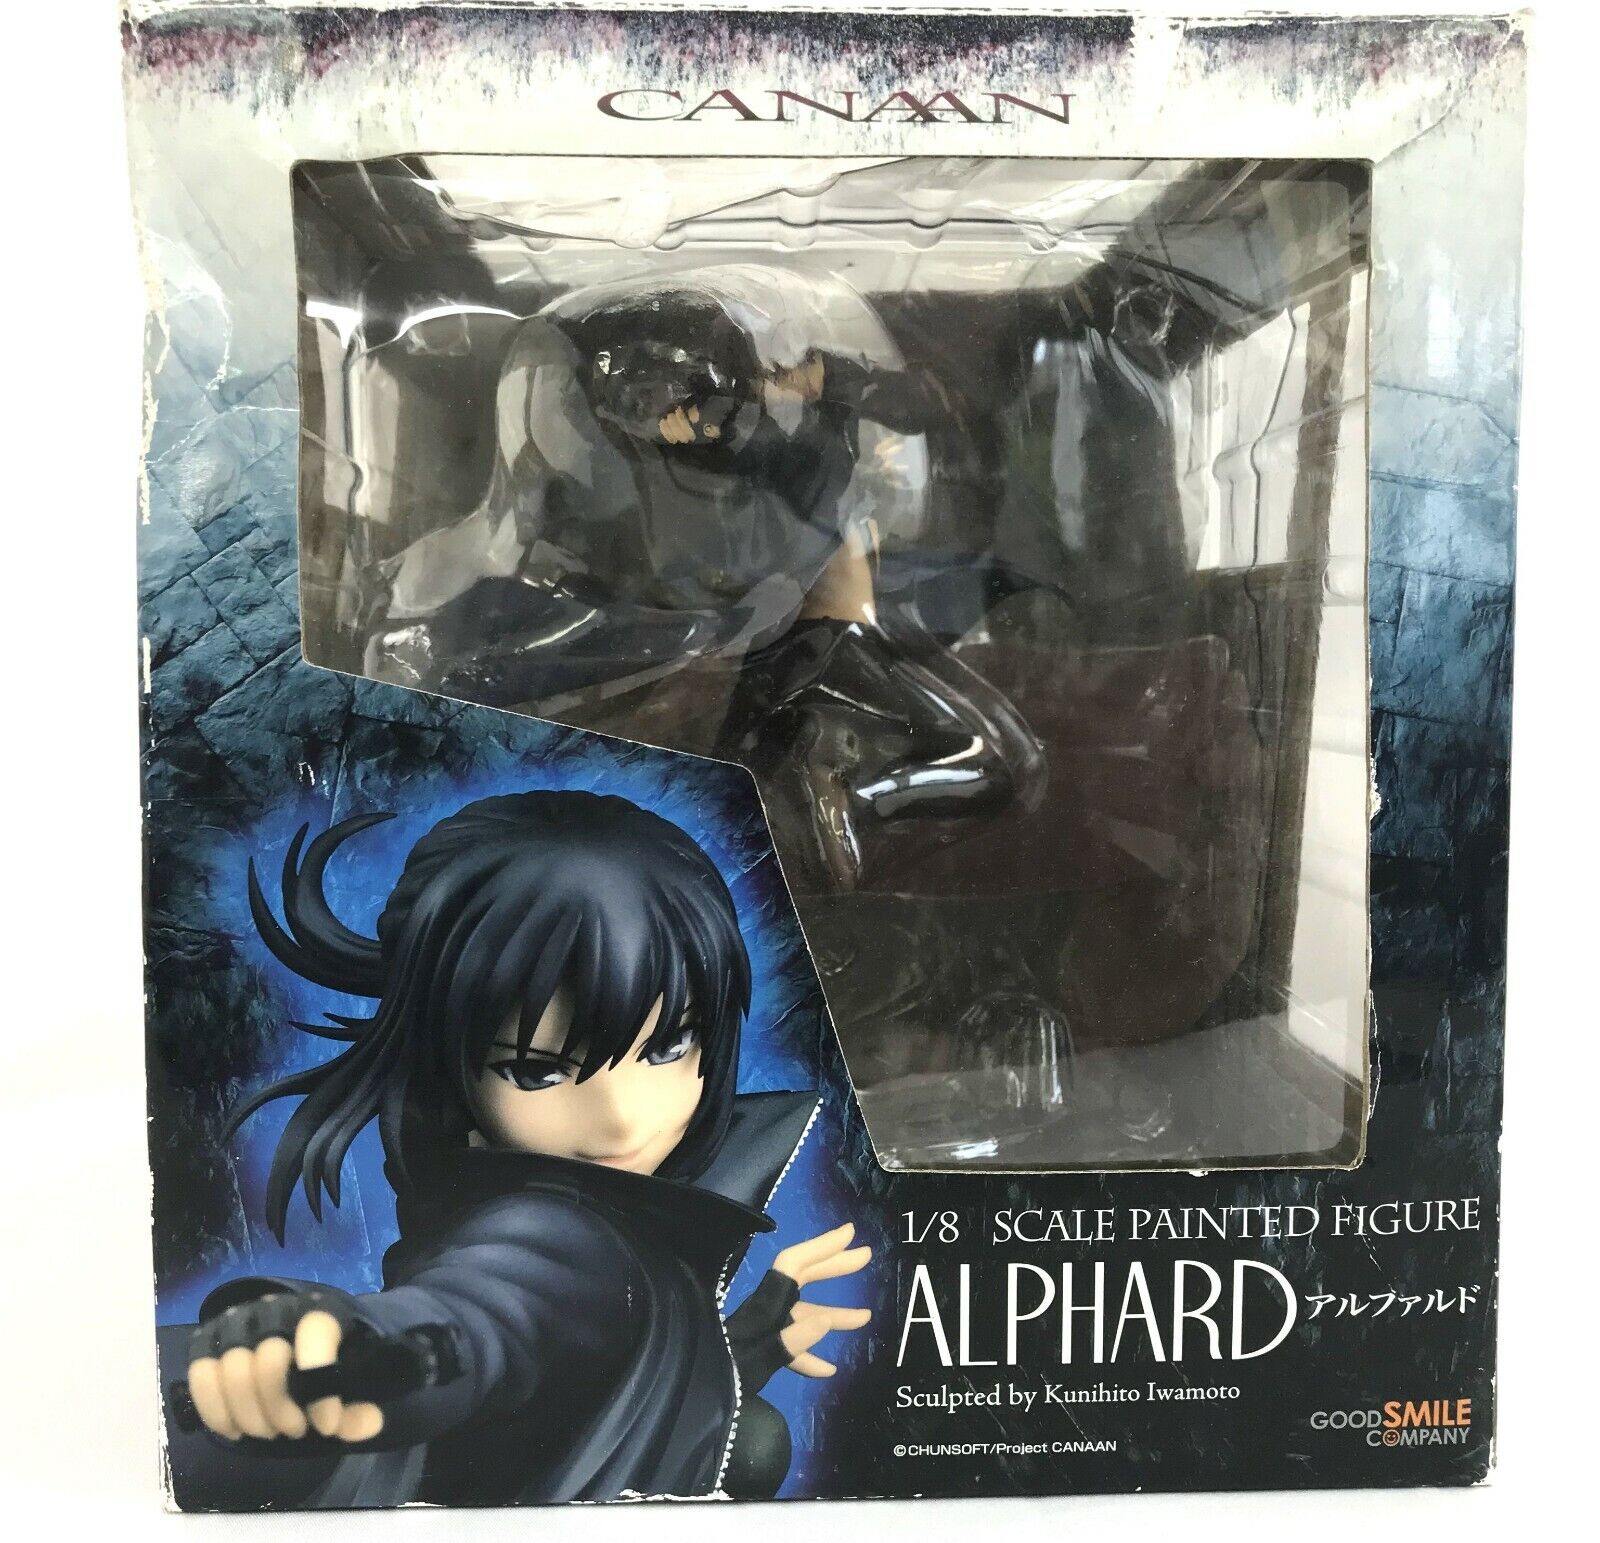 3-7 days from Japan CANAAN: Alphard 1/8 Scale PVC Figure by Good Smile